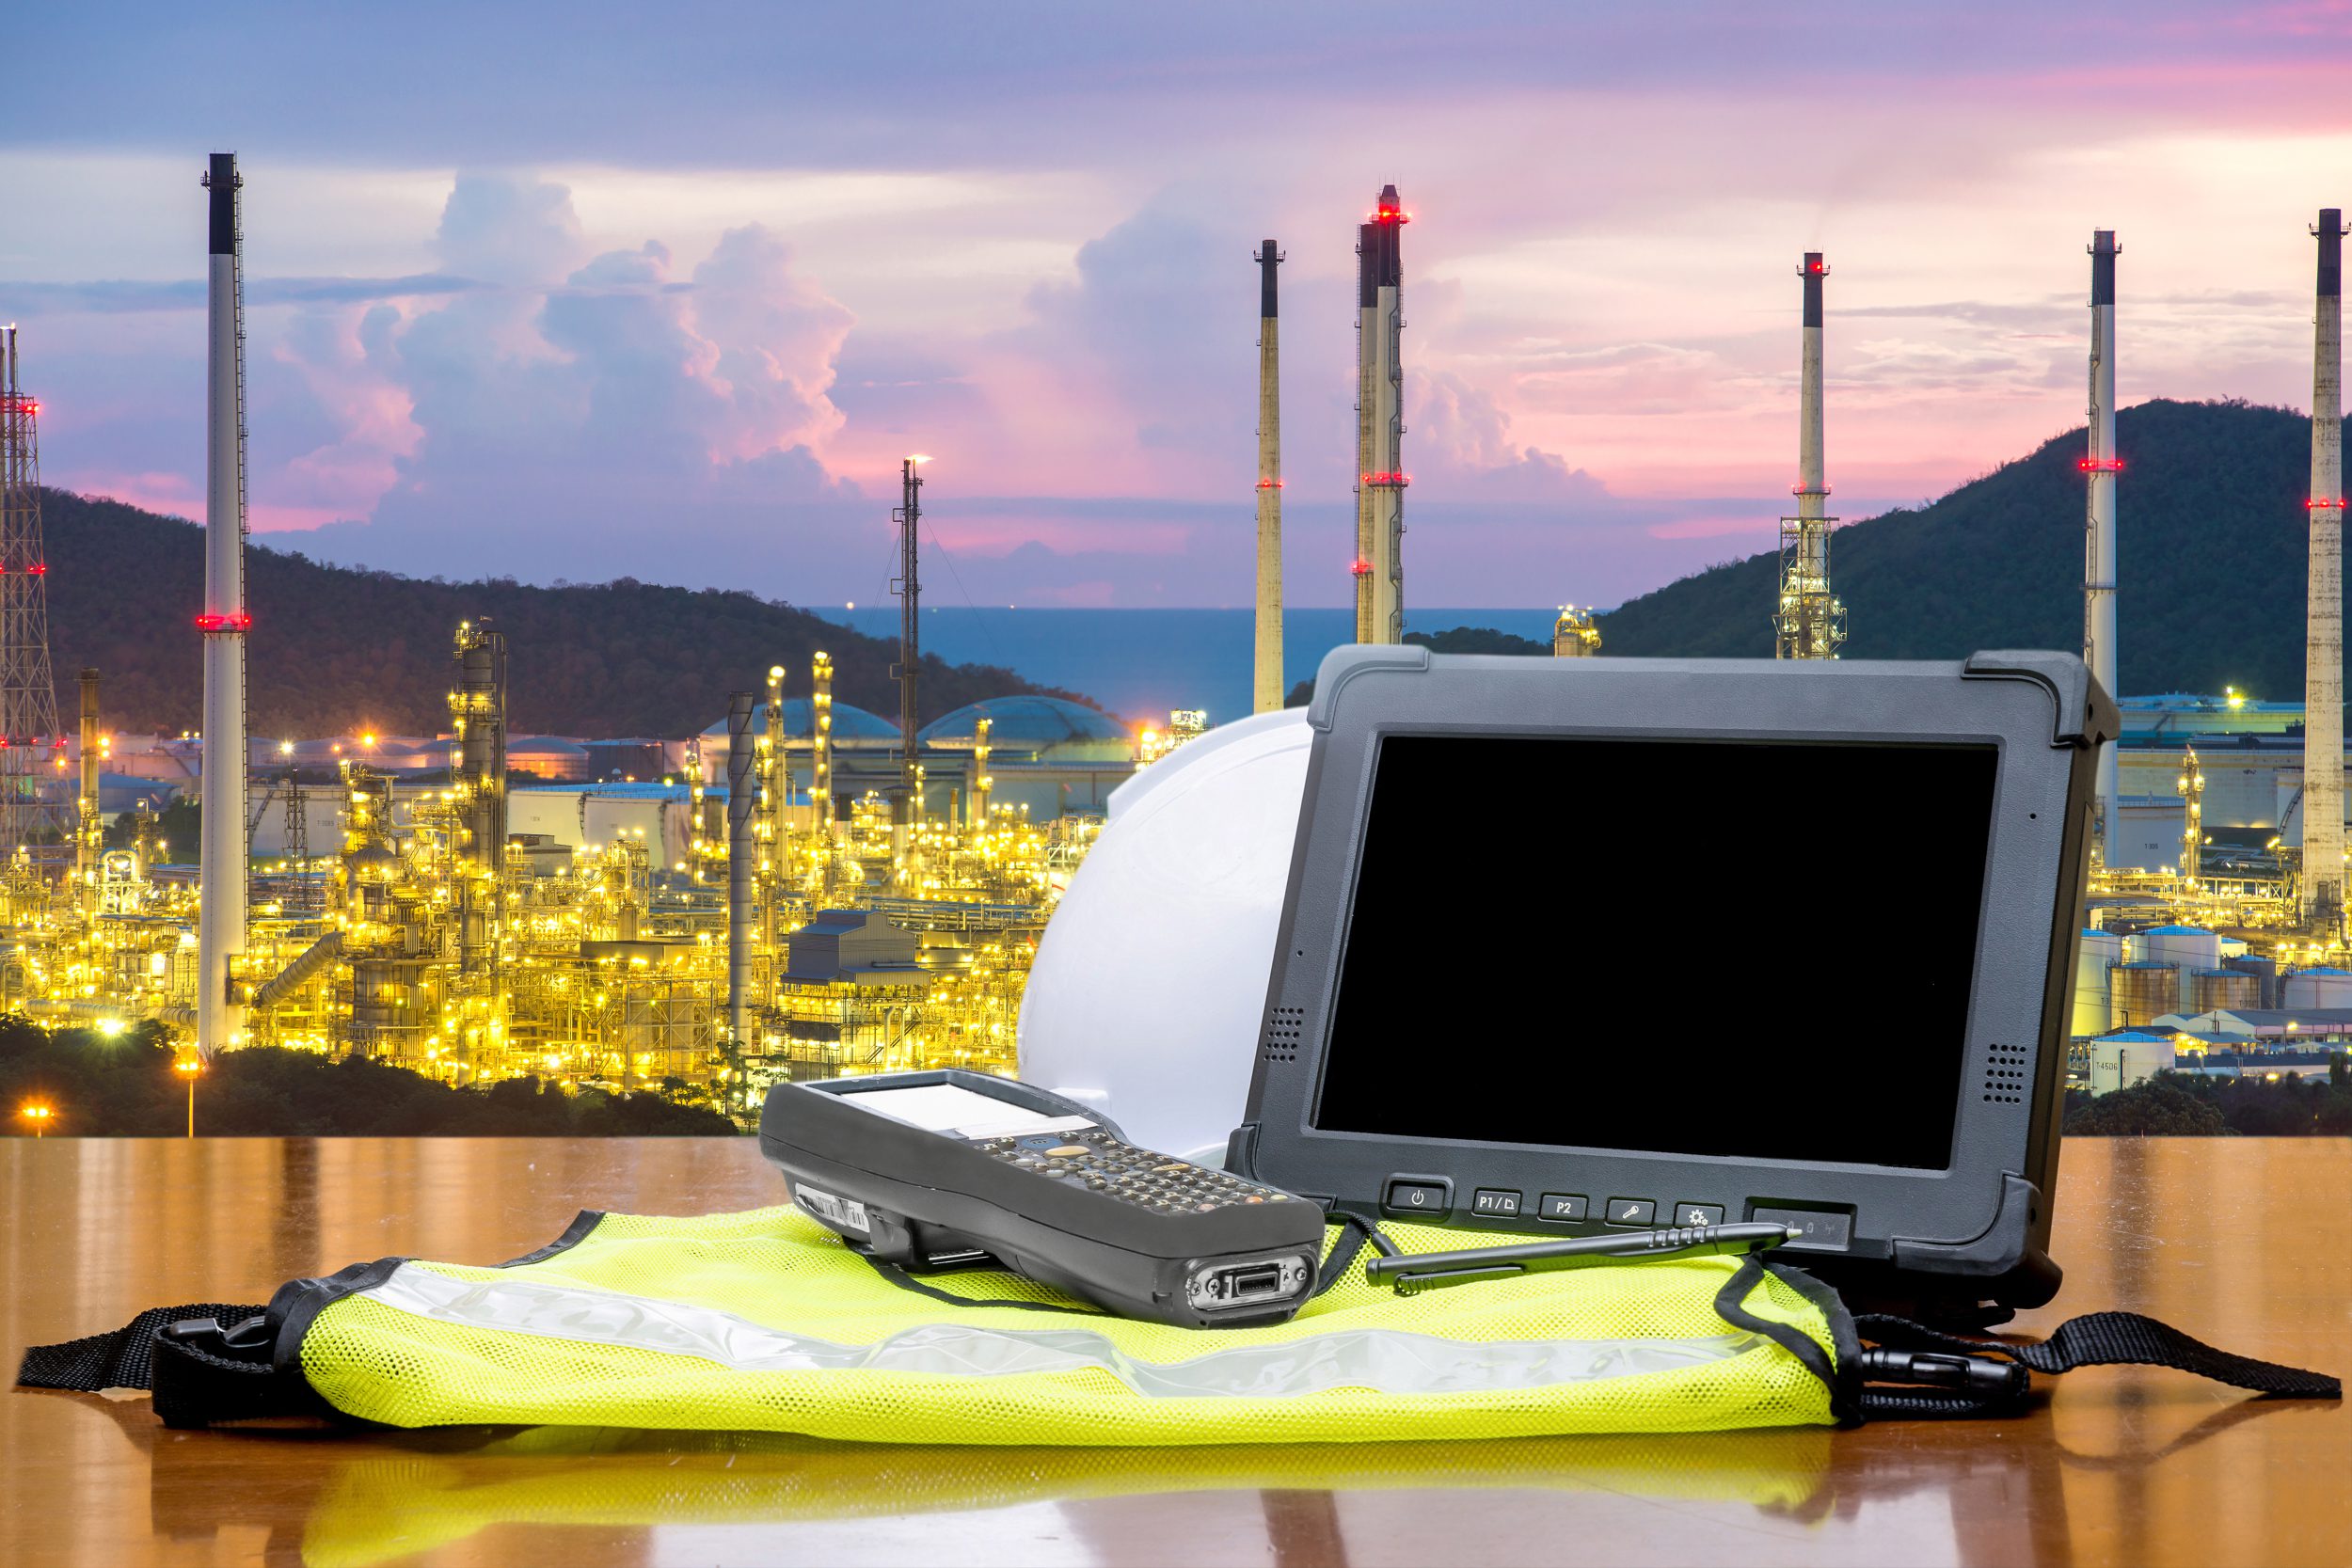 Rugged computers tablet in front of oil refinery industry.